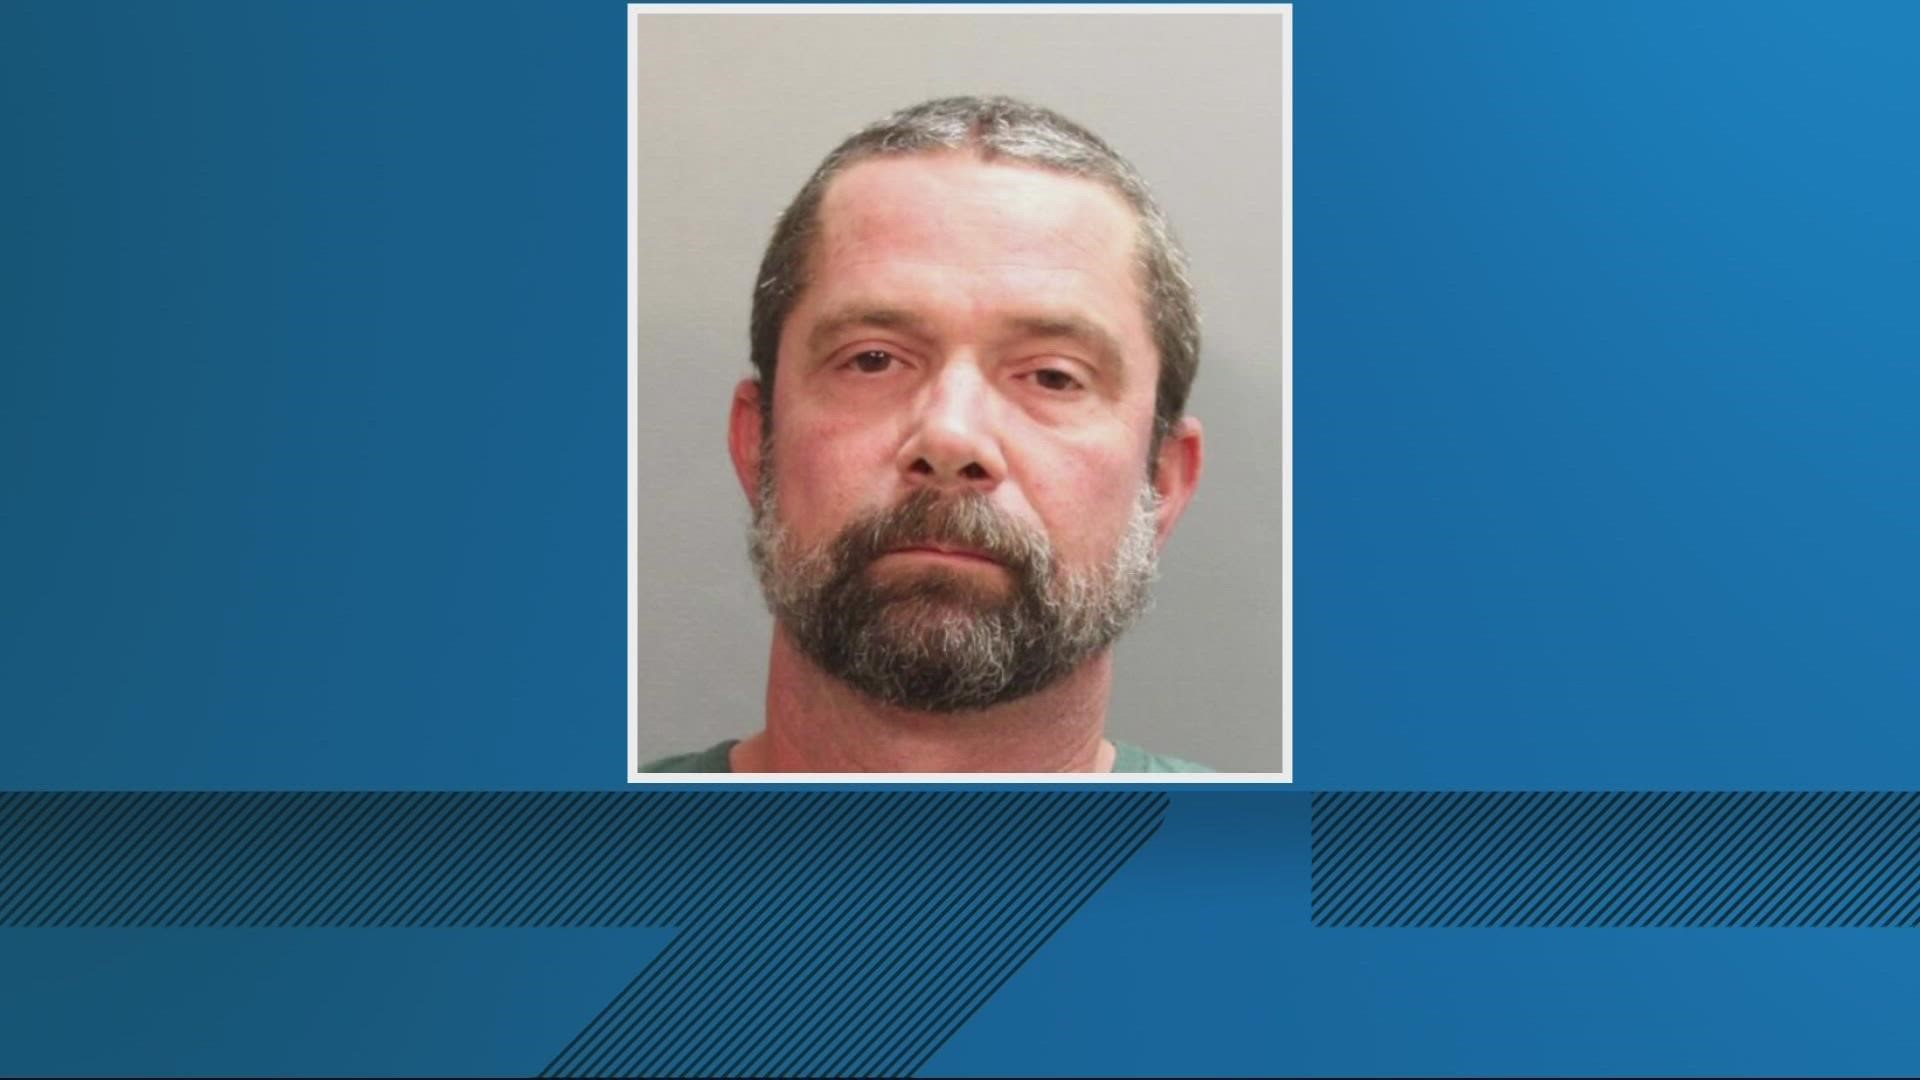 A man was declared dead on the scene of a shooting in the 11000 block of Pine Street in Jacksonville. Charles Richard Butler, 46, was charged with the murder.